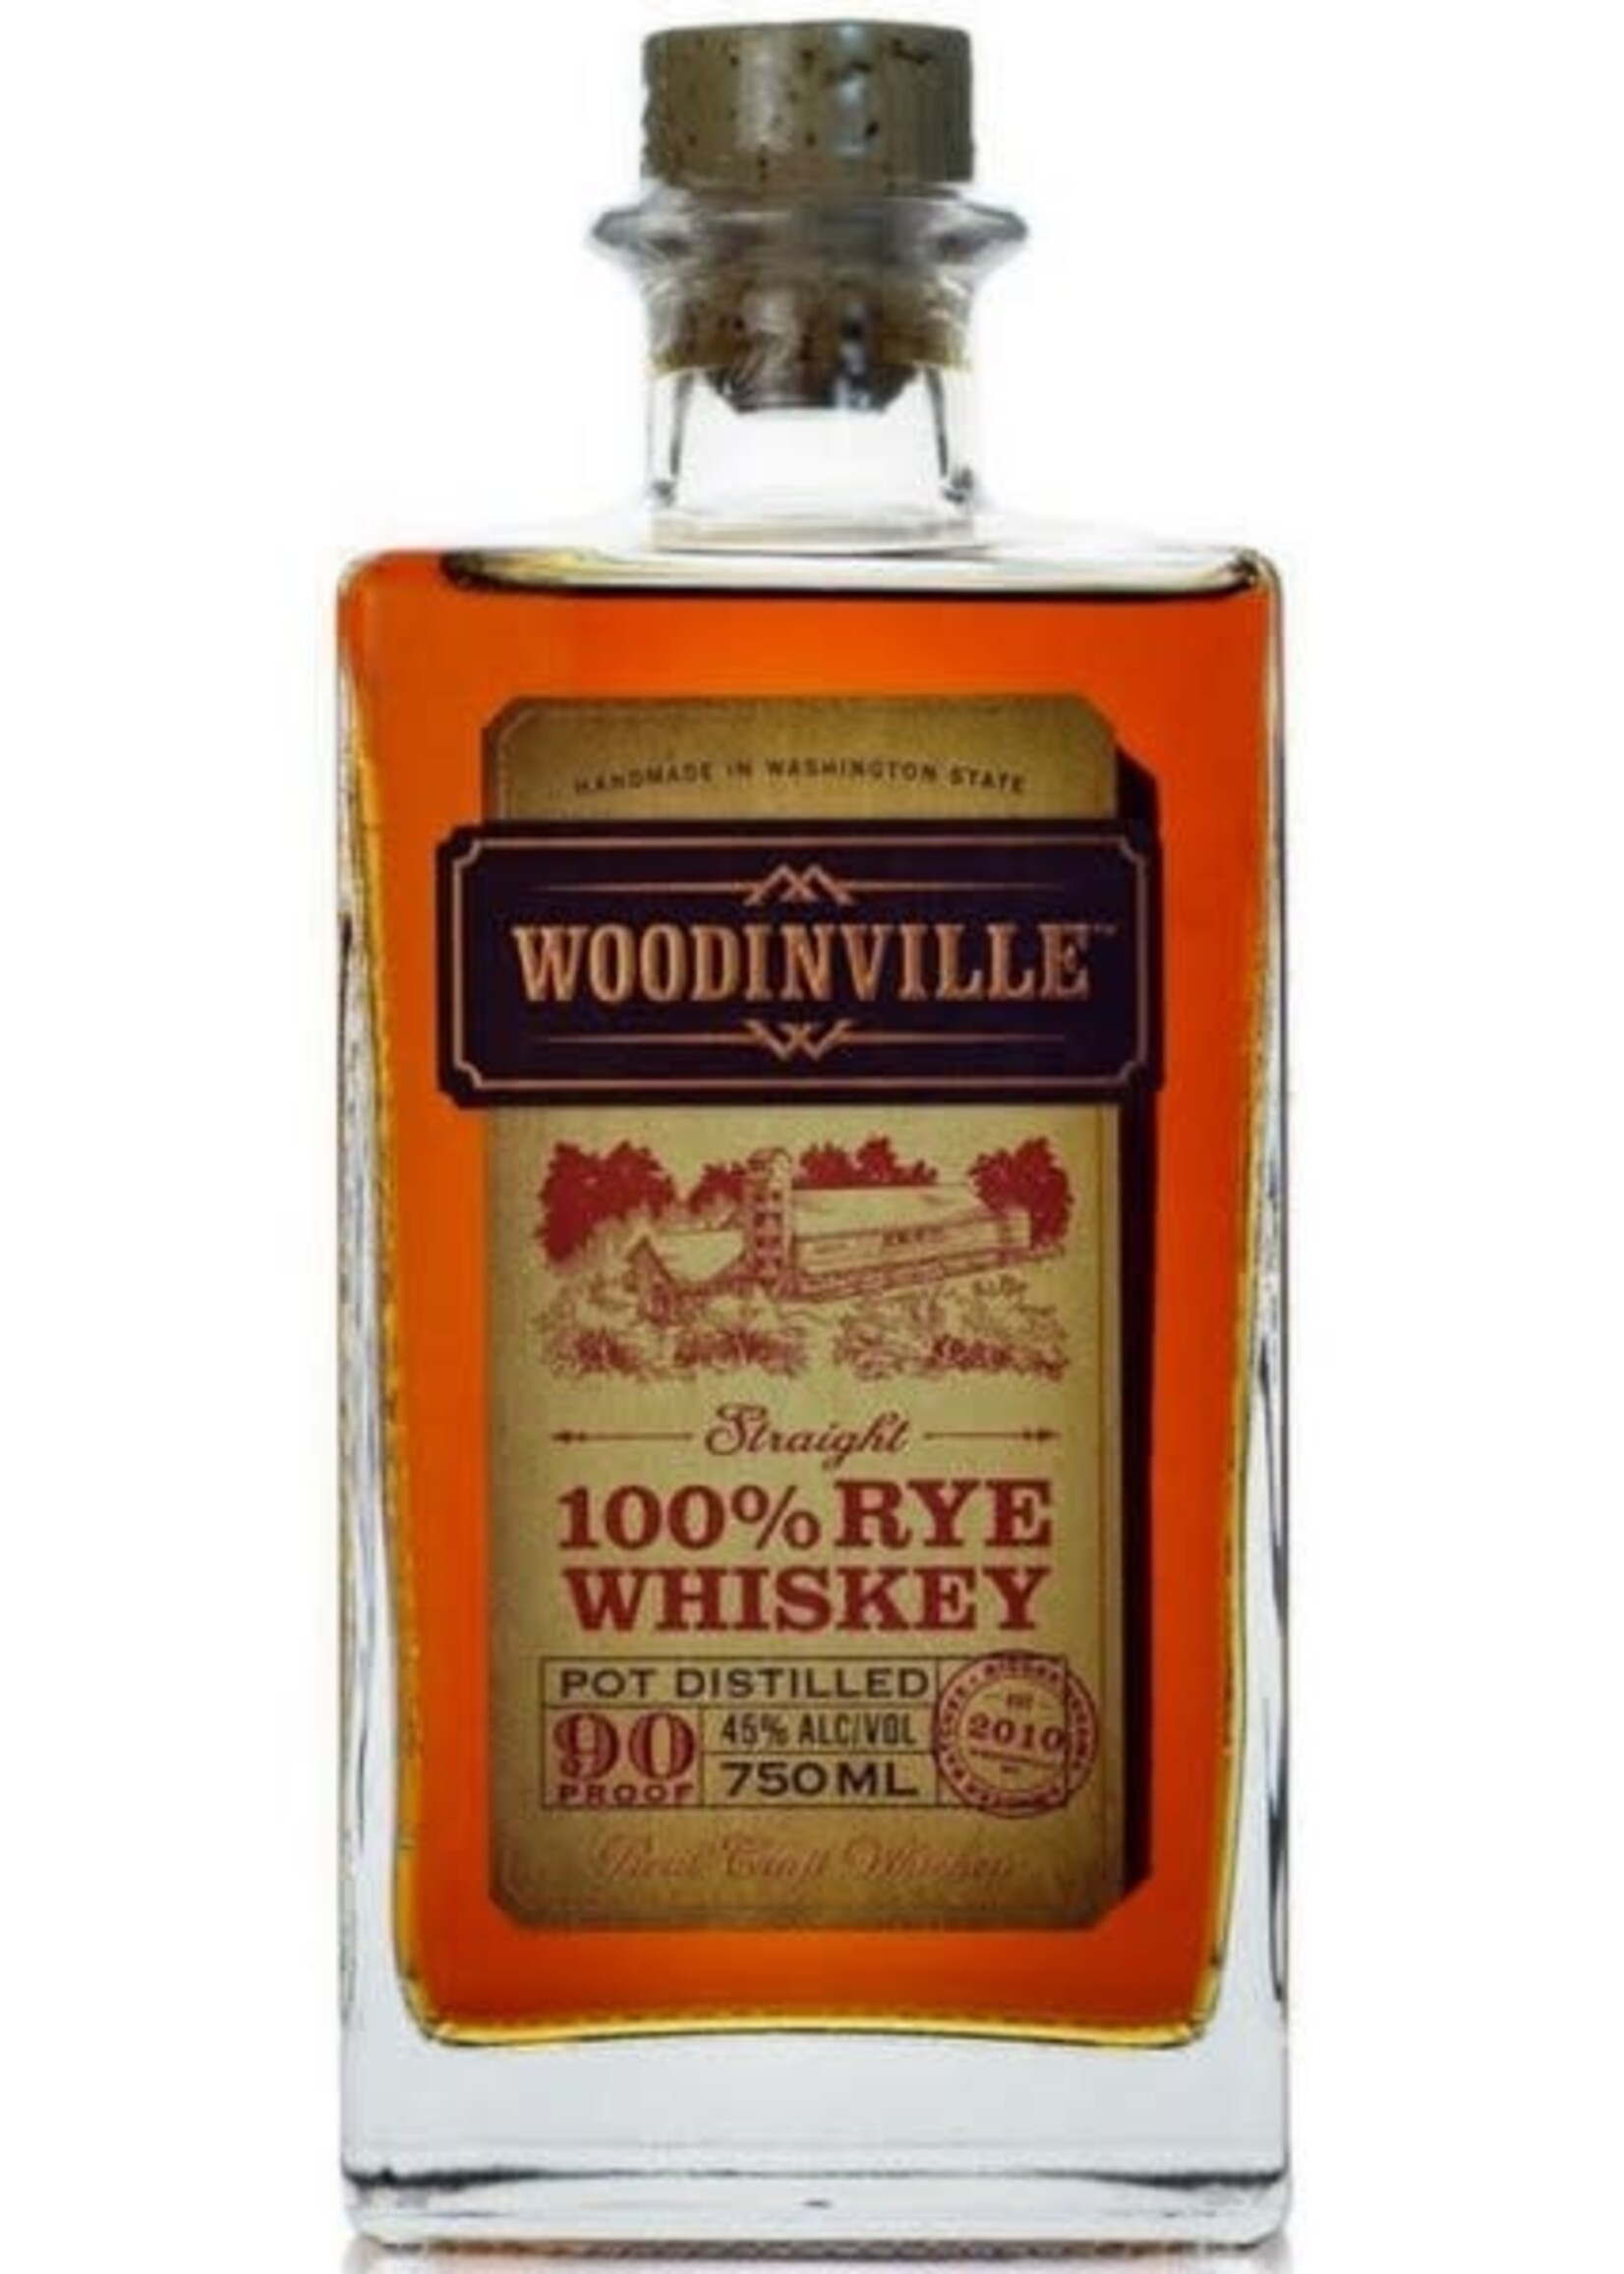 Woodinville Woodinville Whiskey Co / 100% Rye Whiskey / 750mL